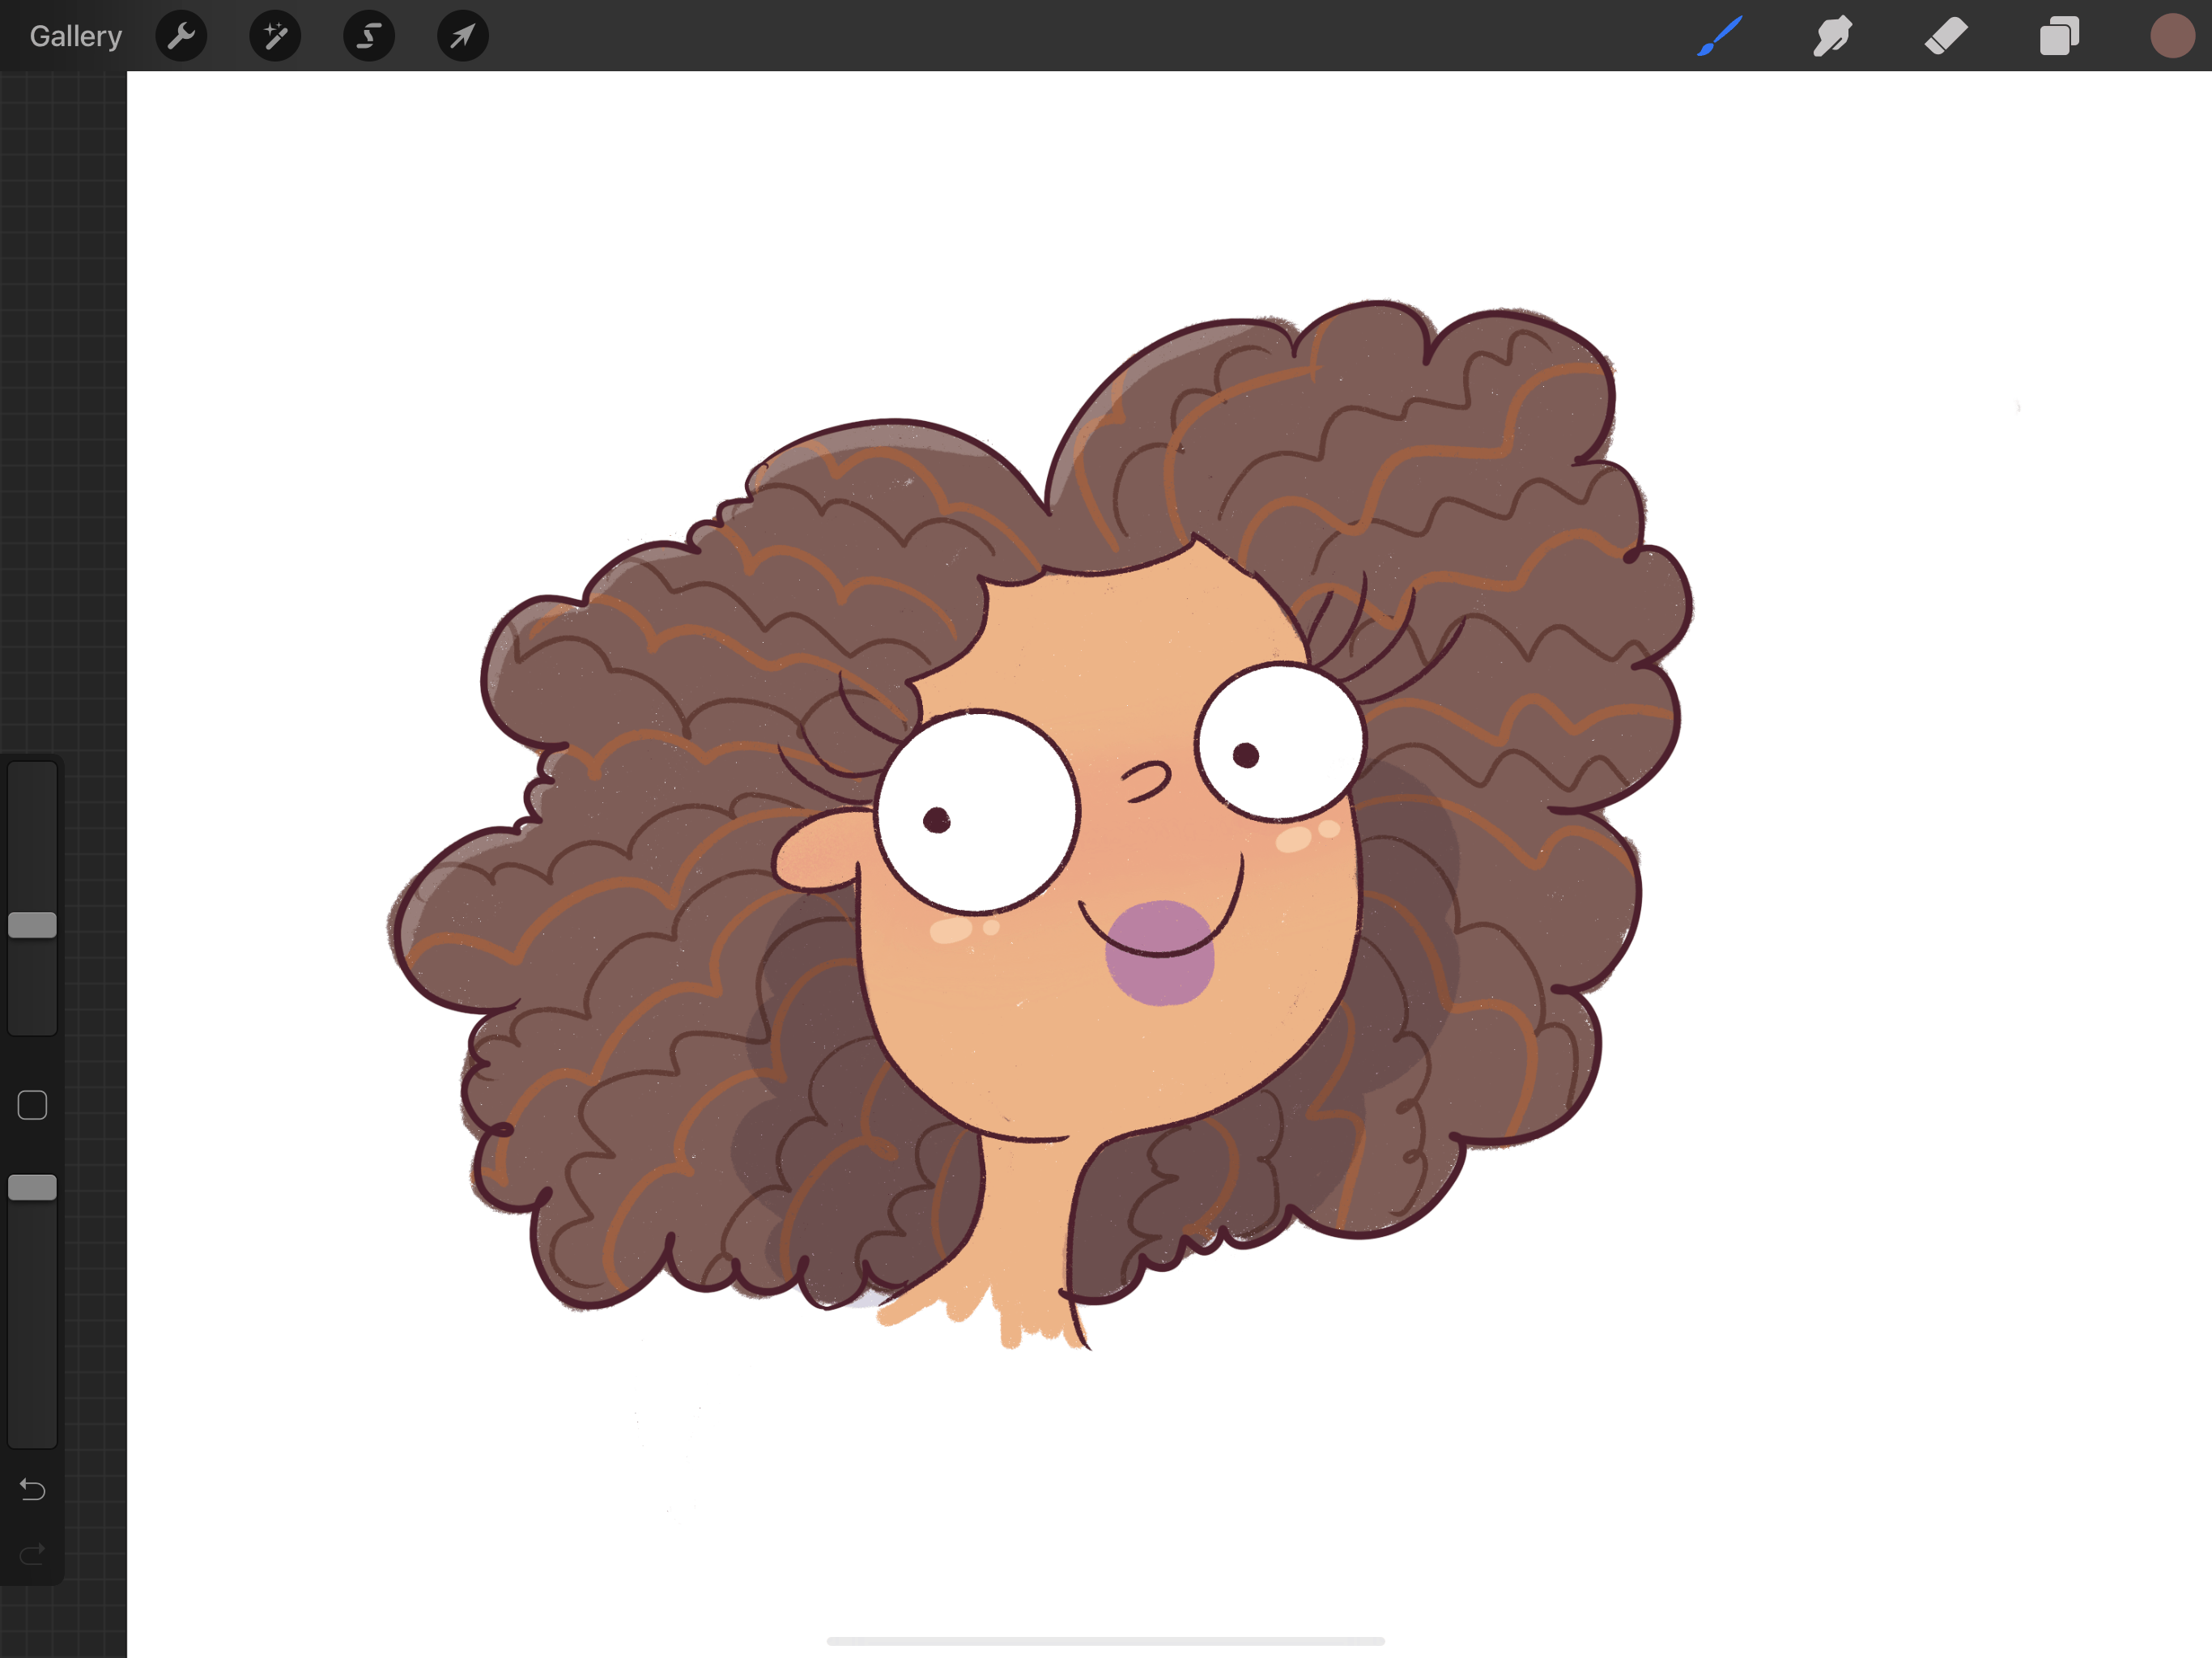 Cartoon Kid with Blue Curly Hair - wide 9